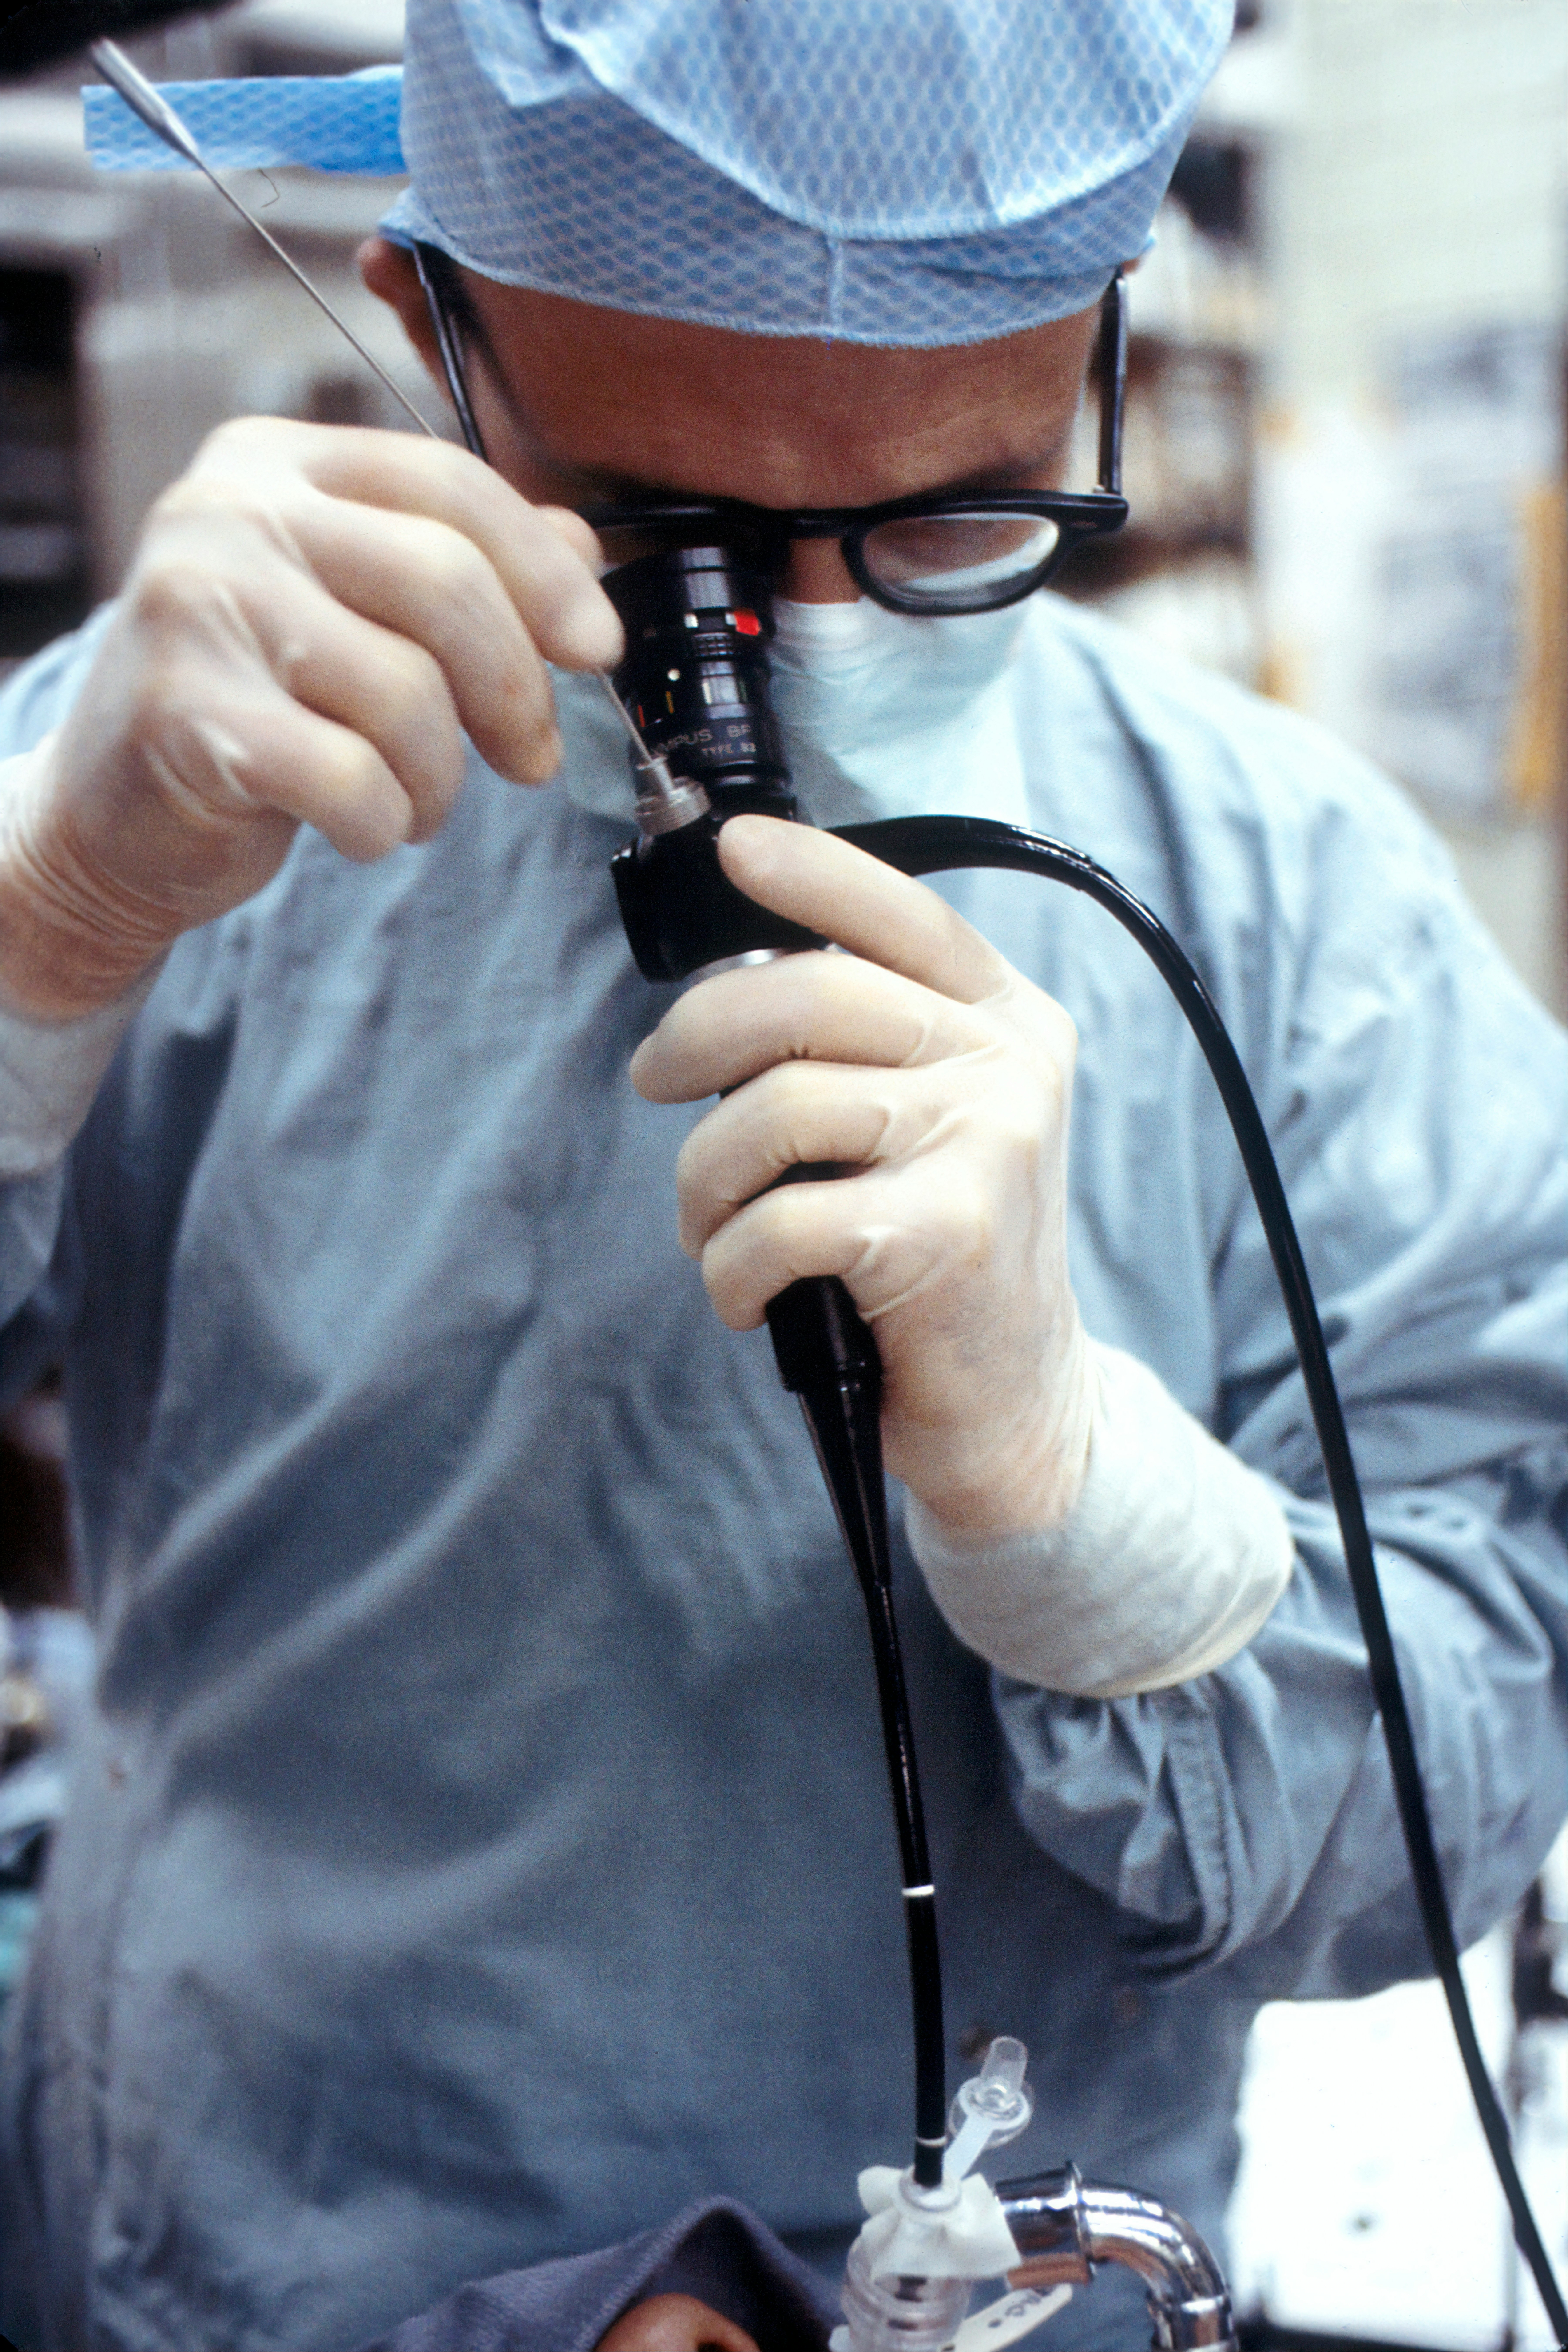 Caucasian male physician using a bronchoscope which is a flexible tube with a light inside and is inserted into the patient's trachea. Doctors can view inside the body through the tube allowing easier access to removal of tumors.